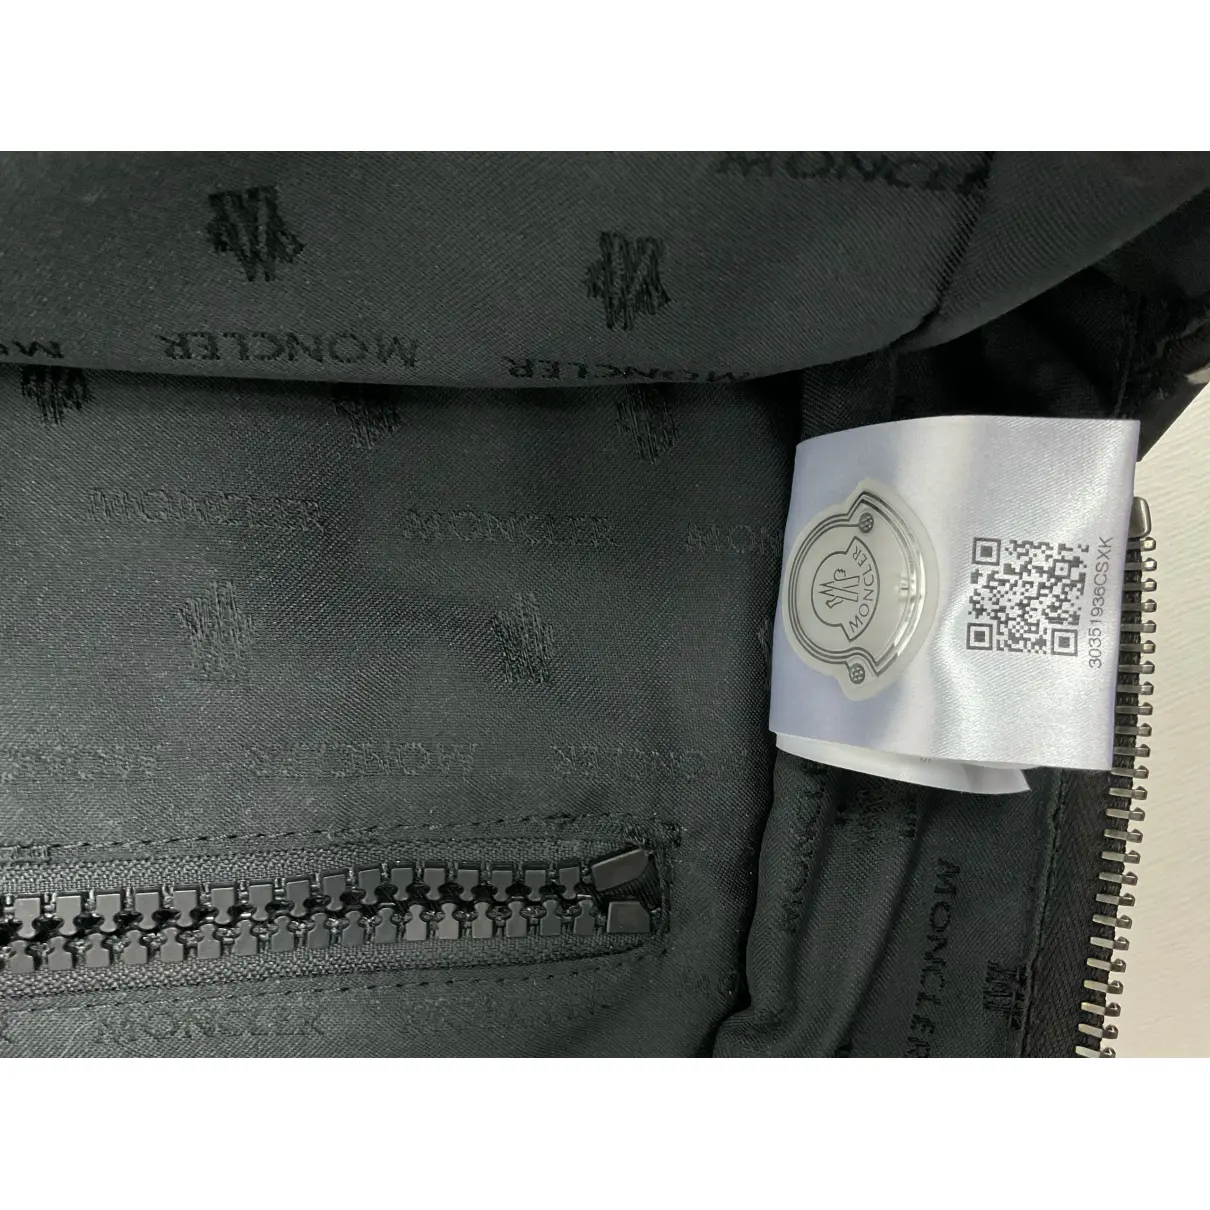 Leather backpack Moncler